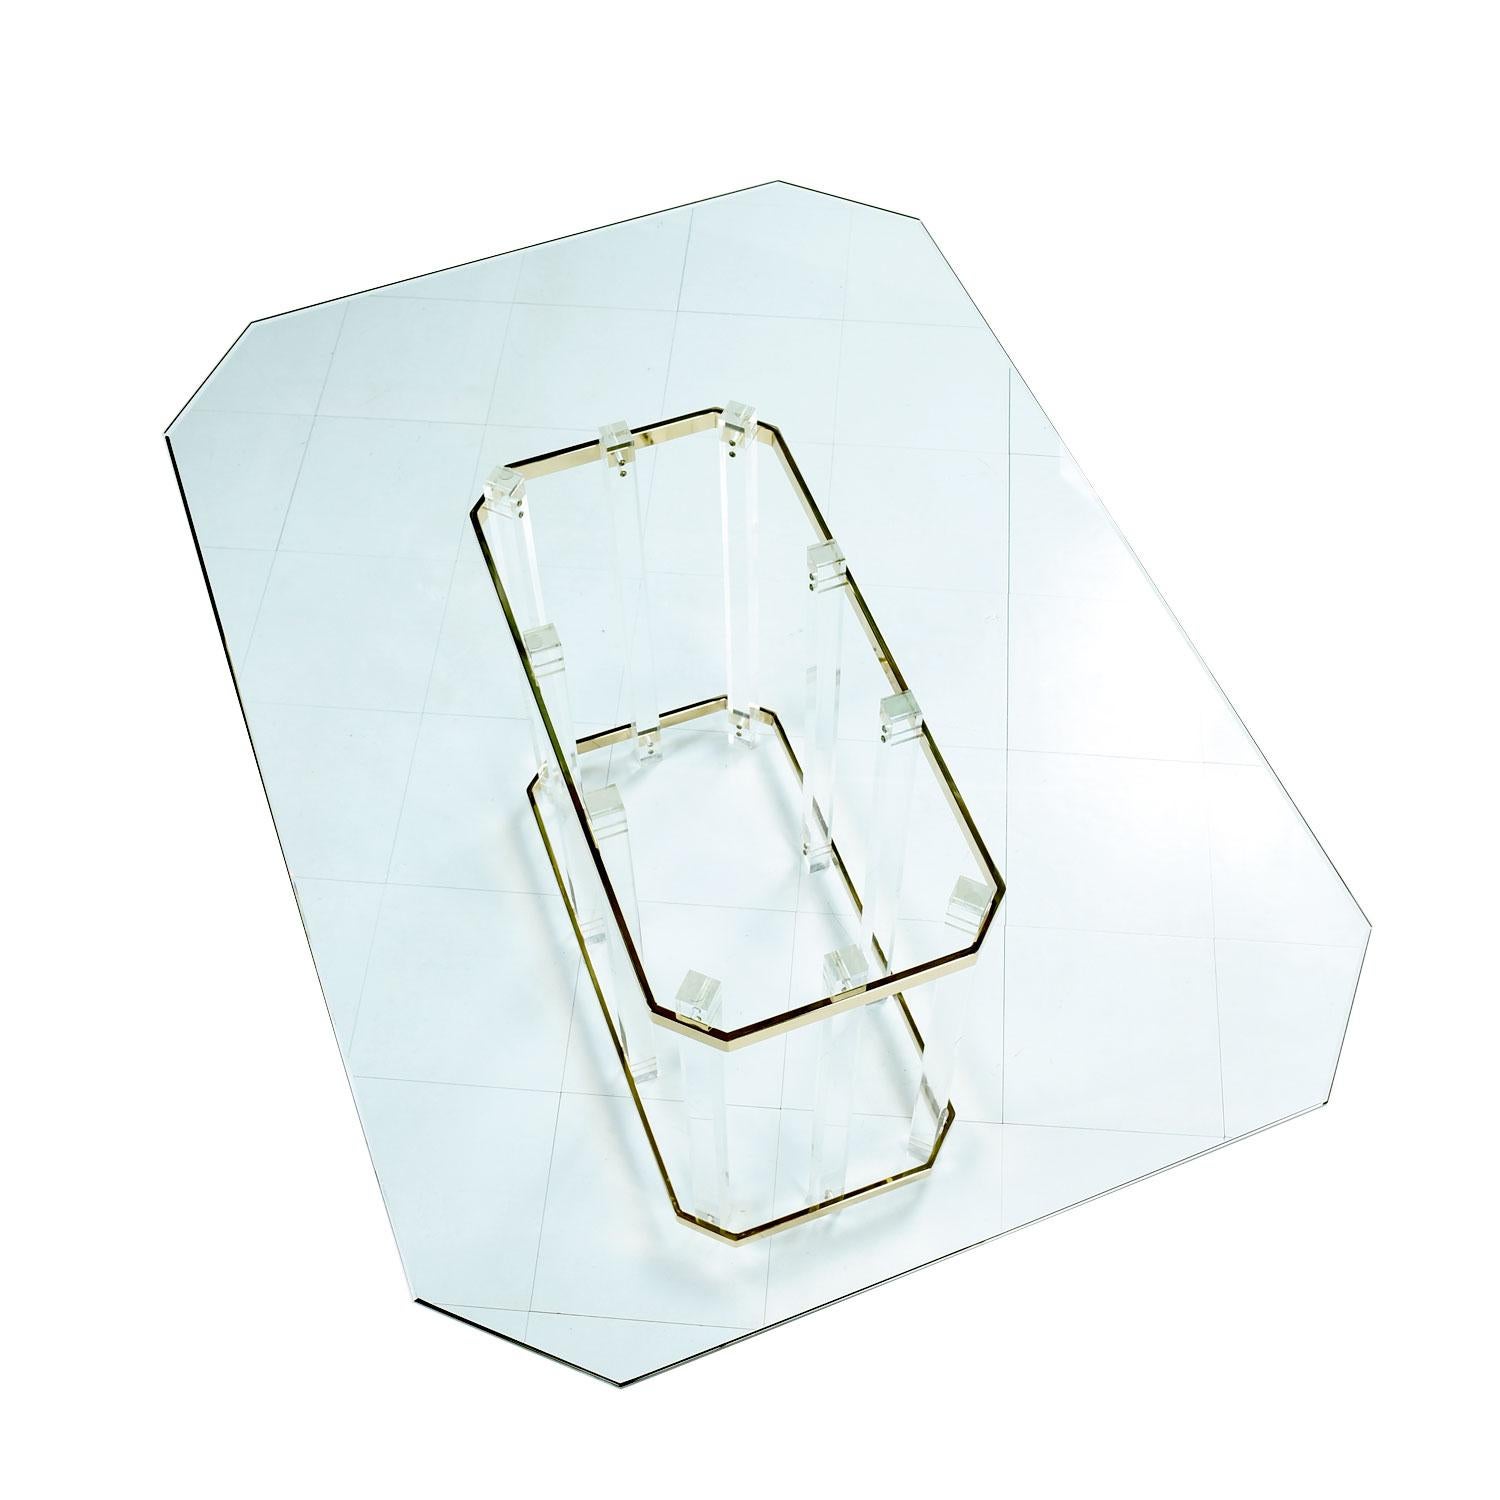 Vintage 1980s Charles Hollis Jones style Lucite and brass dining table with beveled glass top. The geometric beveled glass top creates a silhouette mimicking the dynamic angles and form of the table base. Vertical acrylic architectural pillars